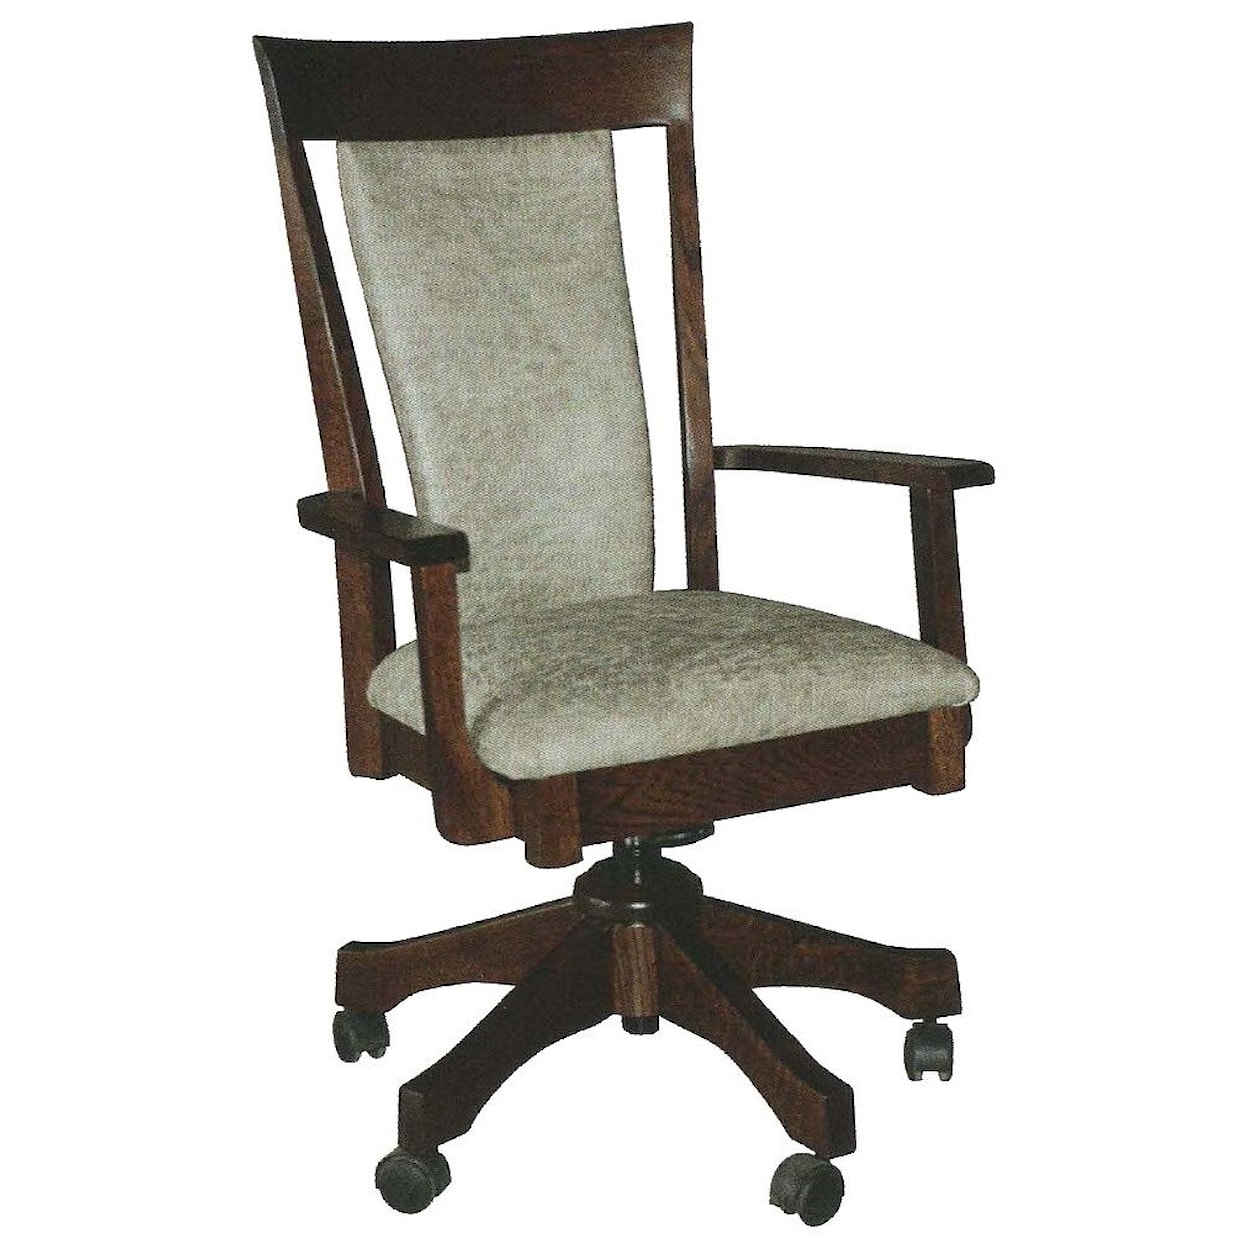 Country Comfort Woodworking Ashley II Desk Chair